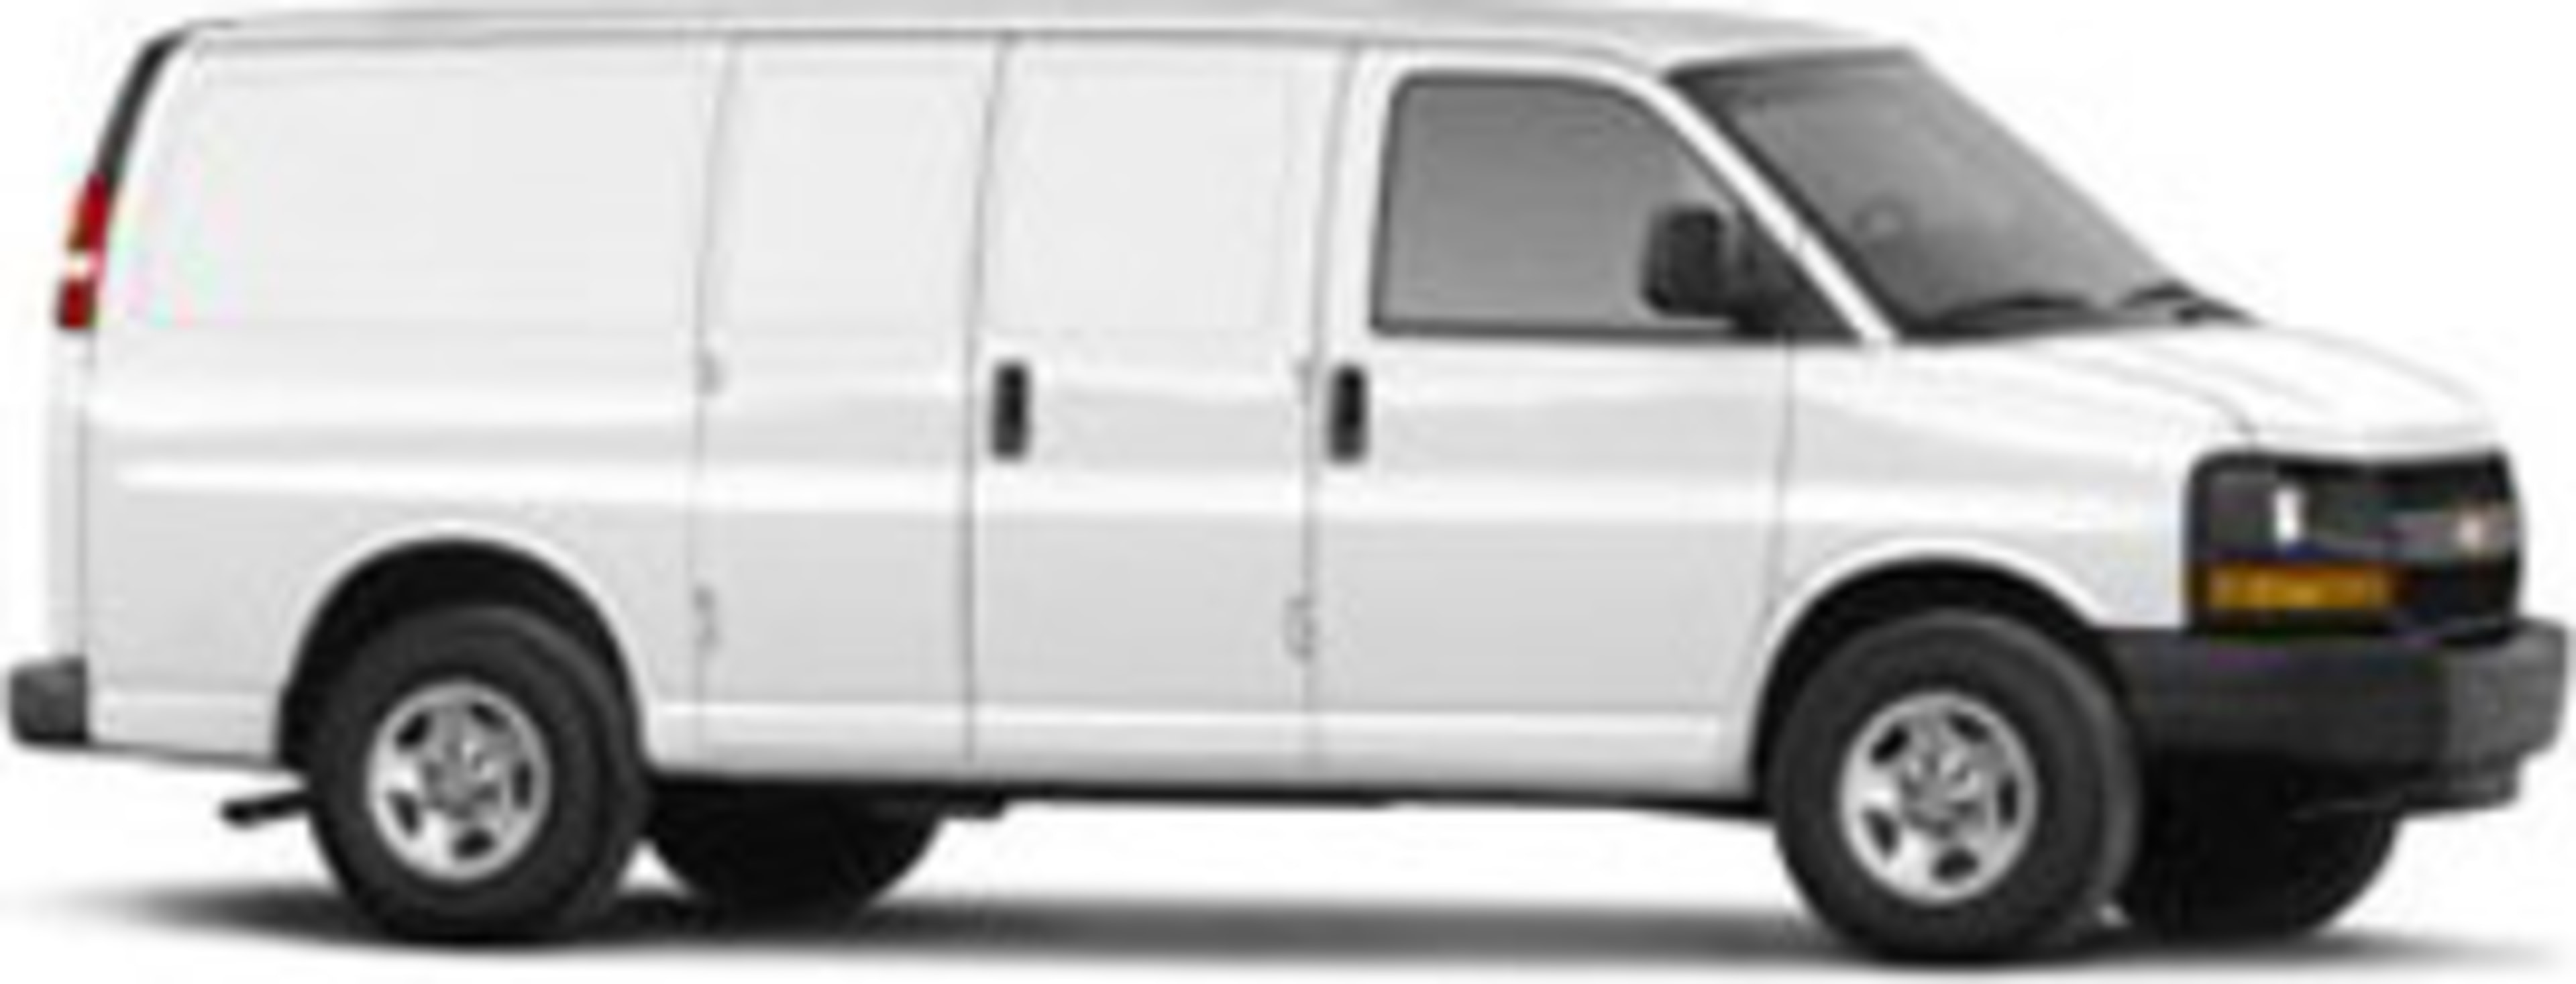 2004 Chevrolet Express 1500 Service and Repair Manual